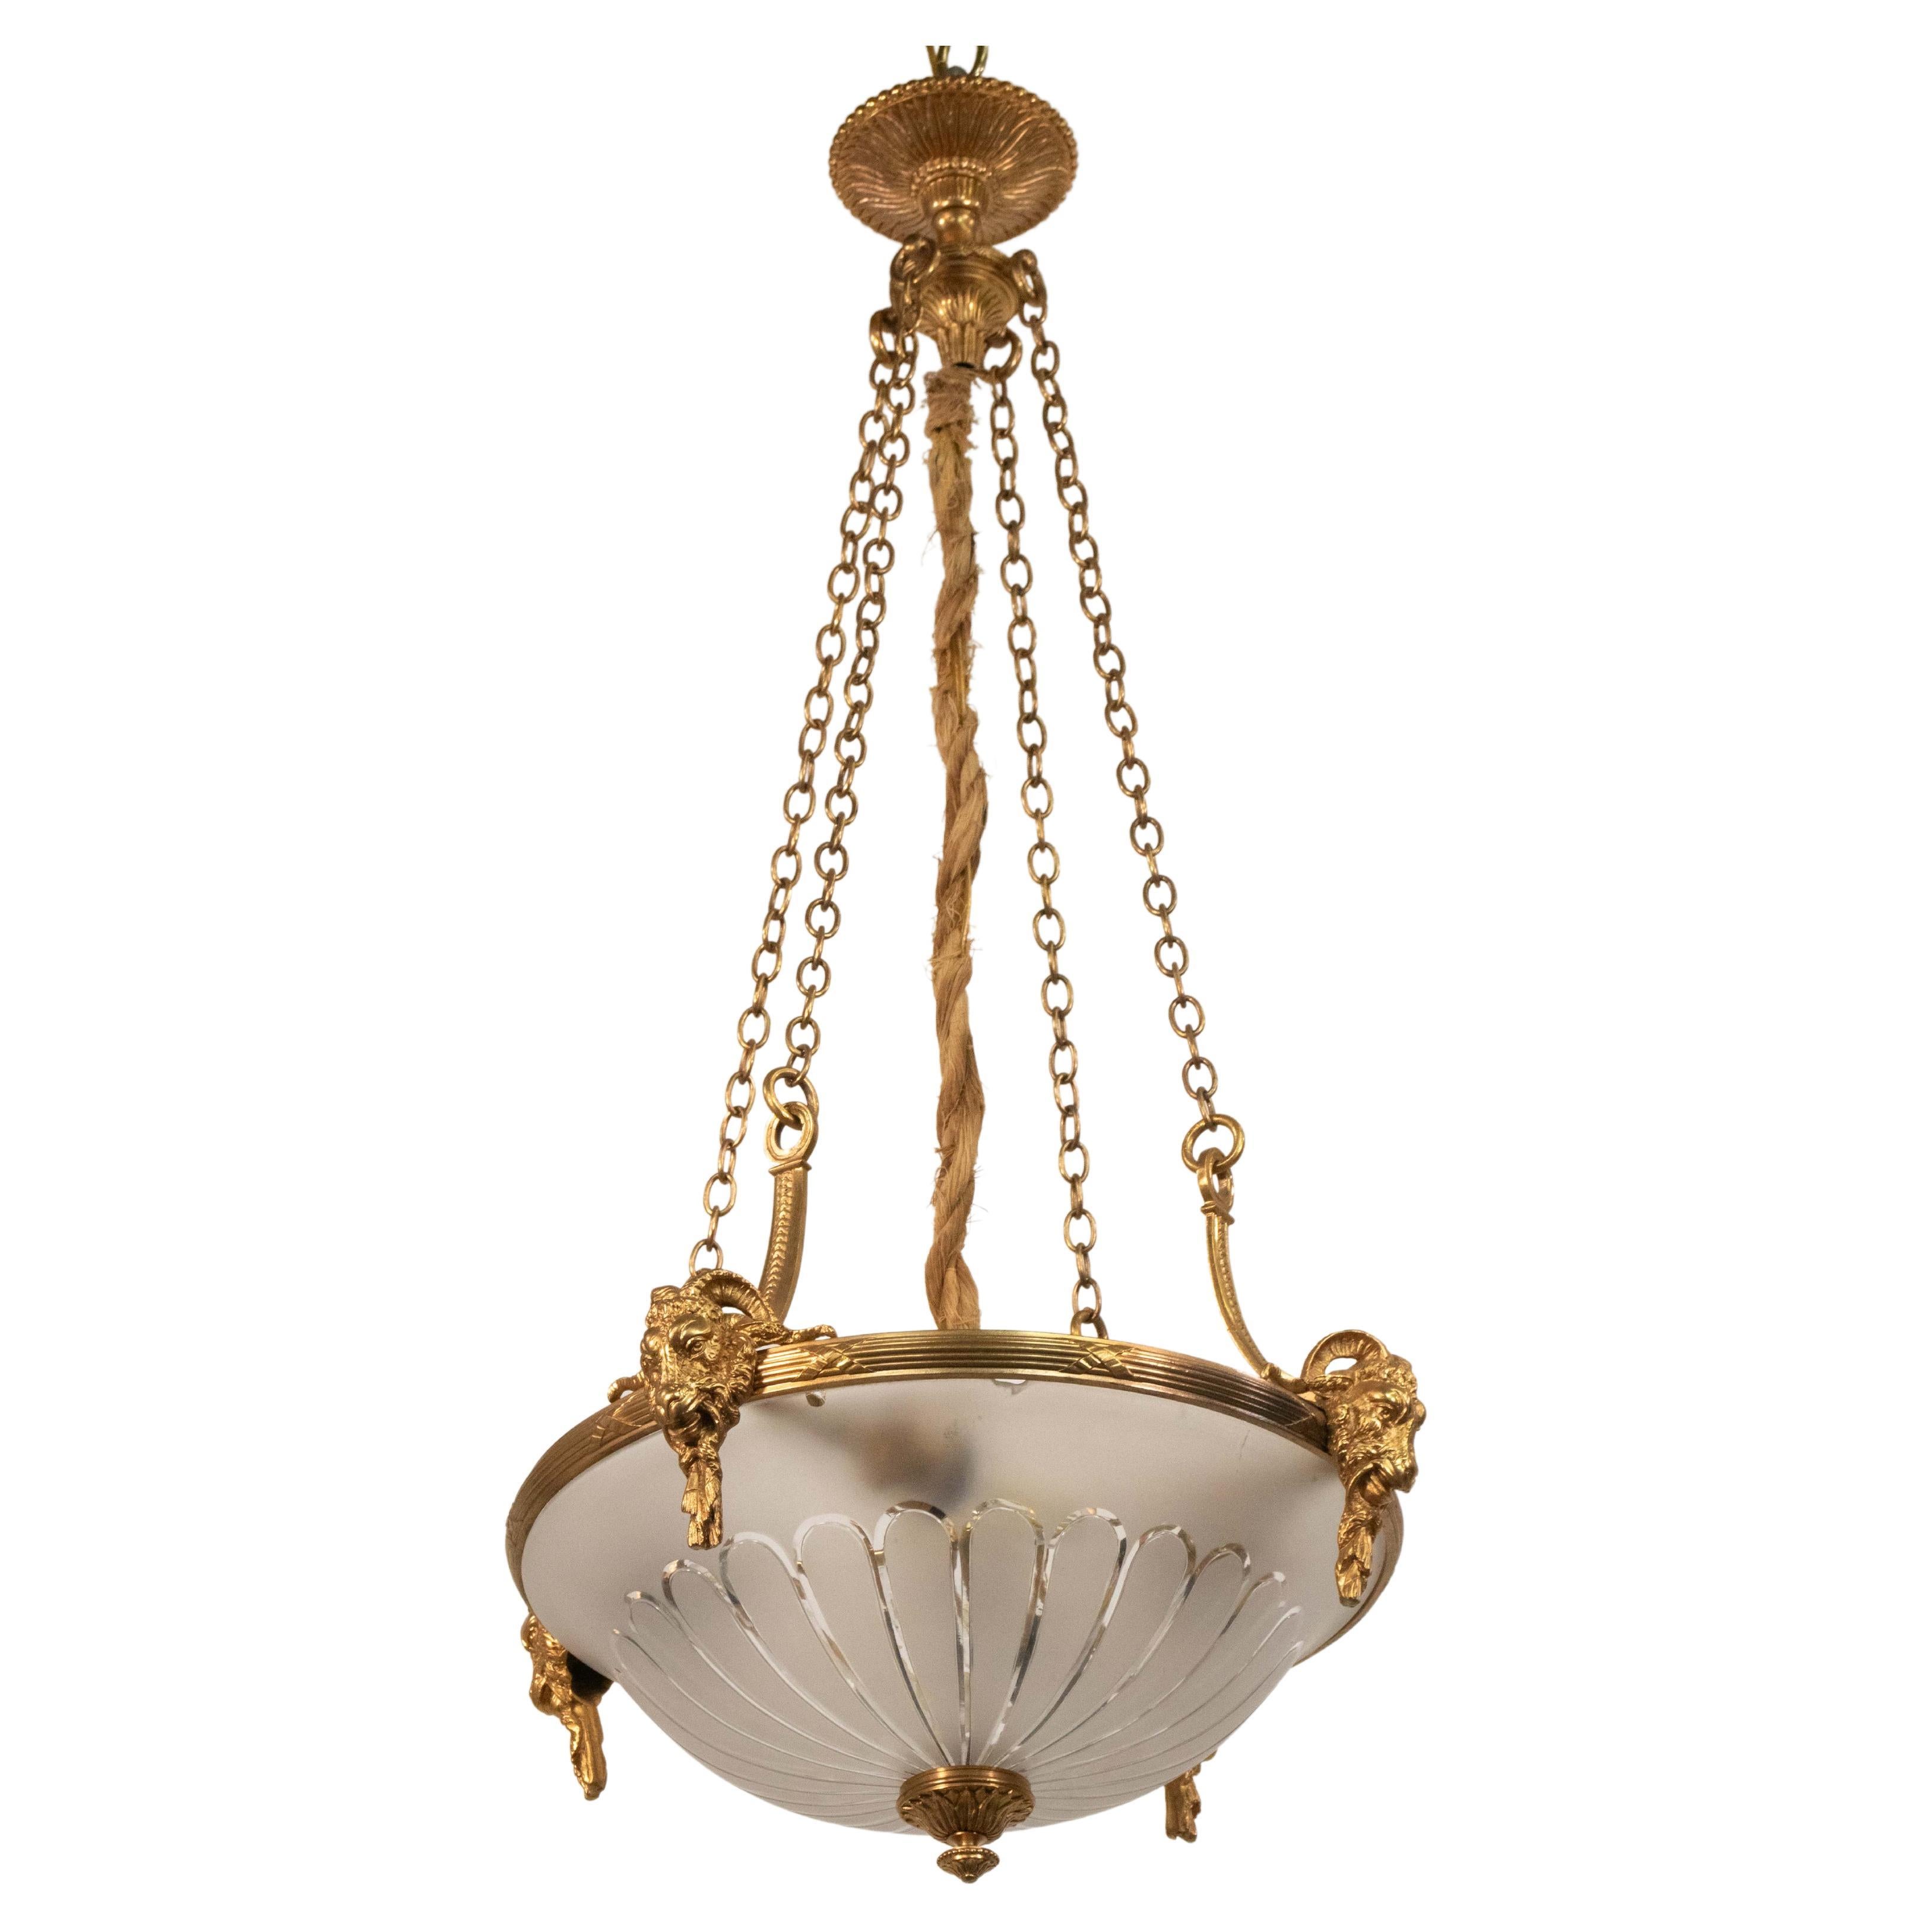 Early 20th Century French Neoclassical Pendant Chandelier with Ormolu and Glass